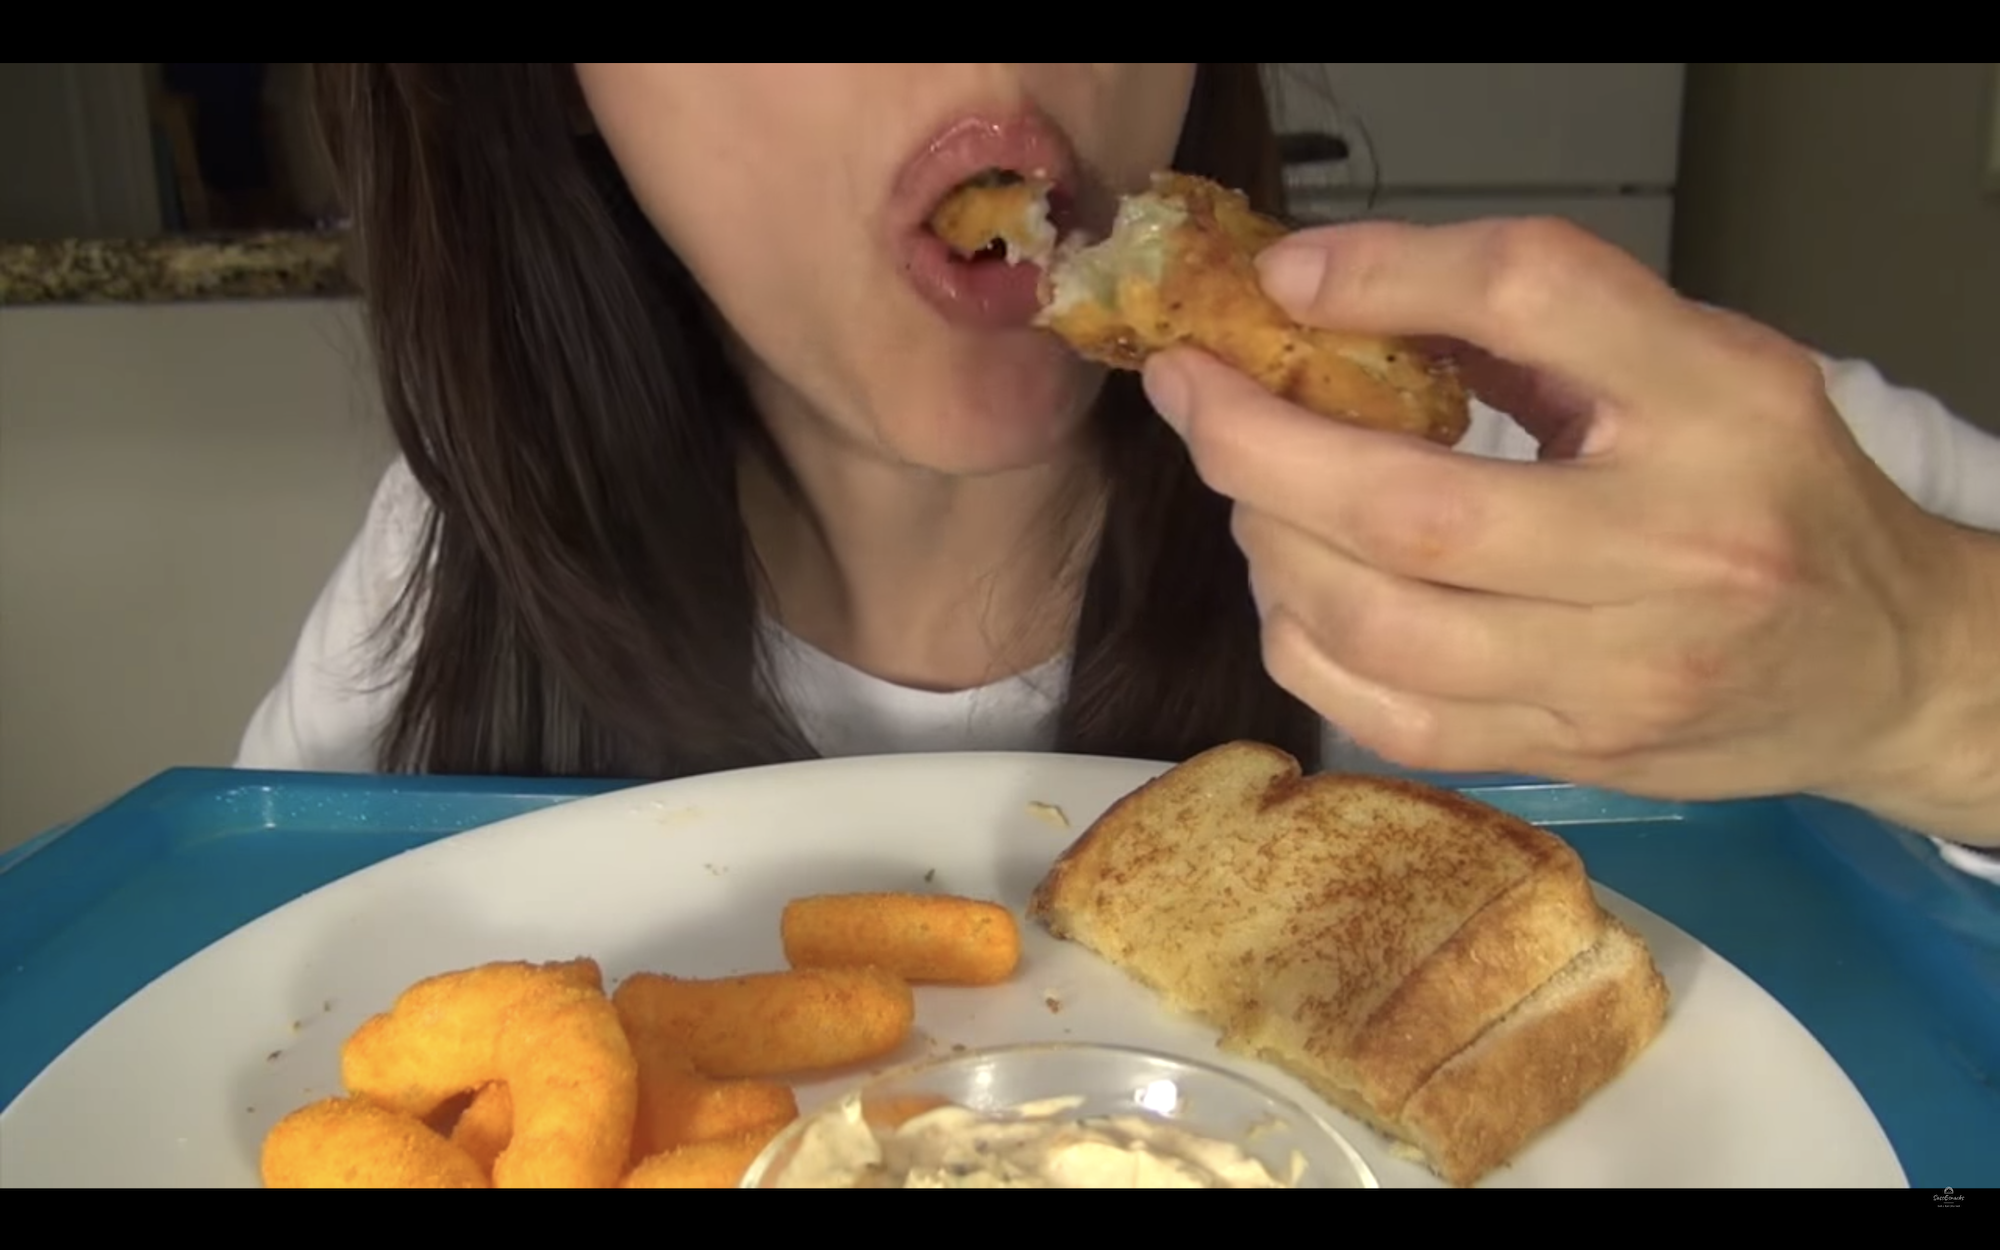 A close up video of a woman eating a fried pickle, half of it in her mouth, the other half held in her hand with a plate of cheese puff and half of a grilled cheese.